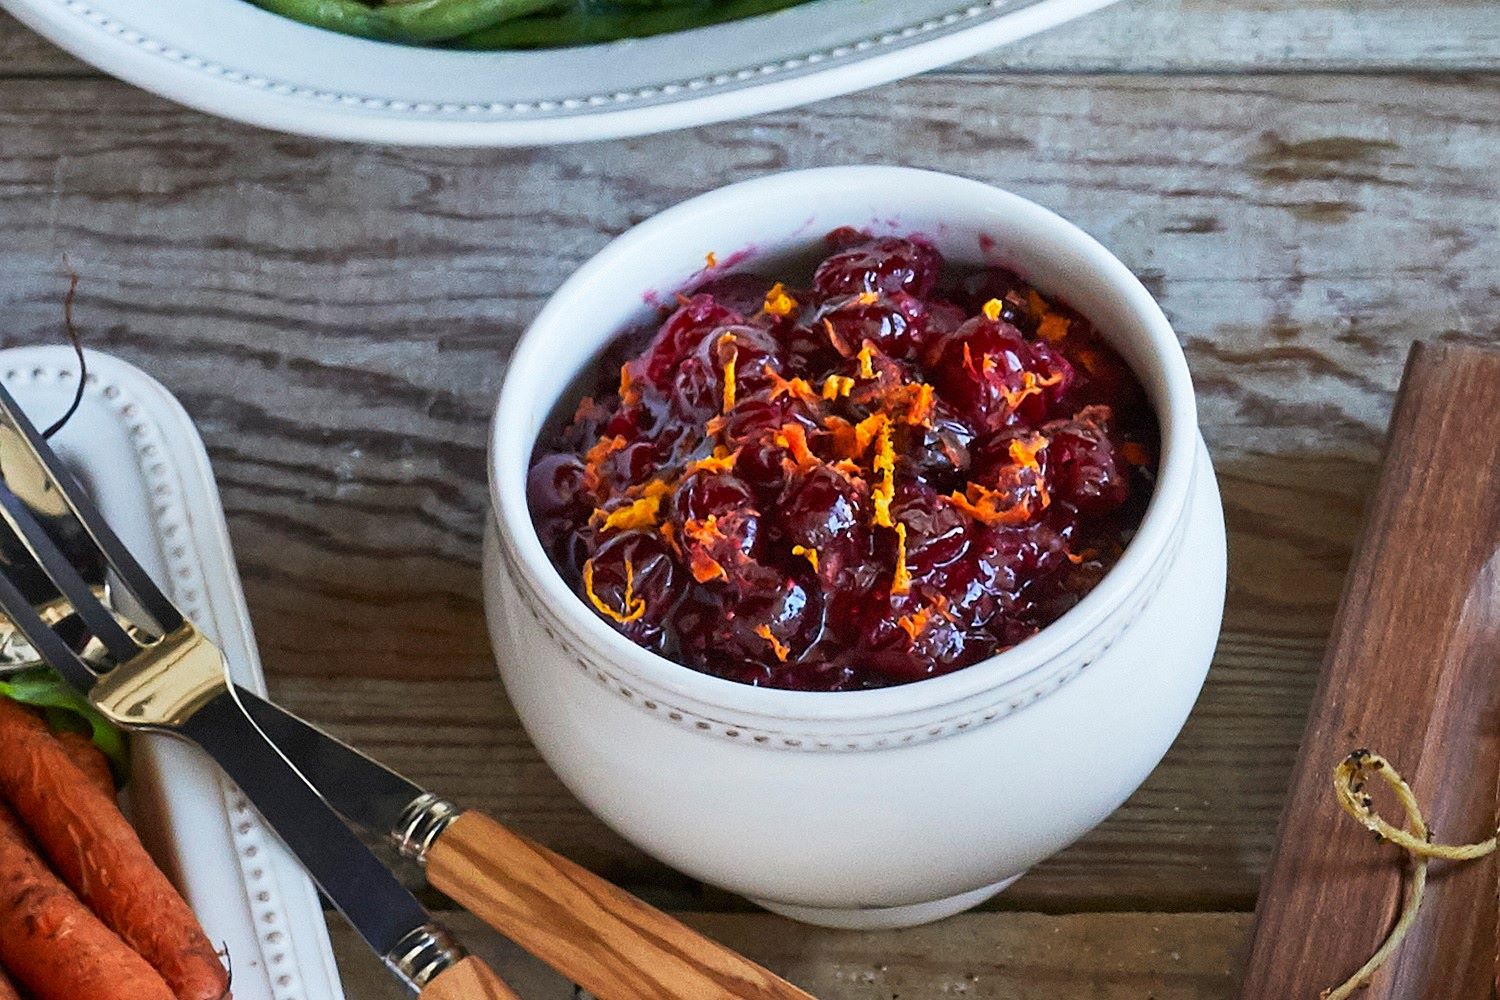 Get the From-Scratch Cranberry Sauce recipe!